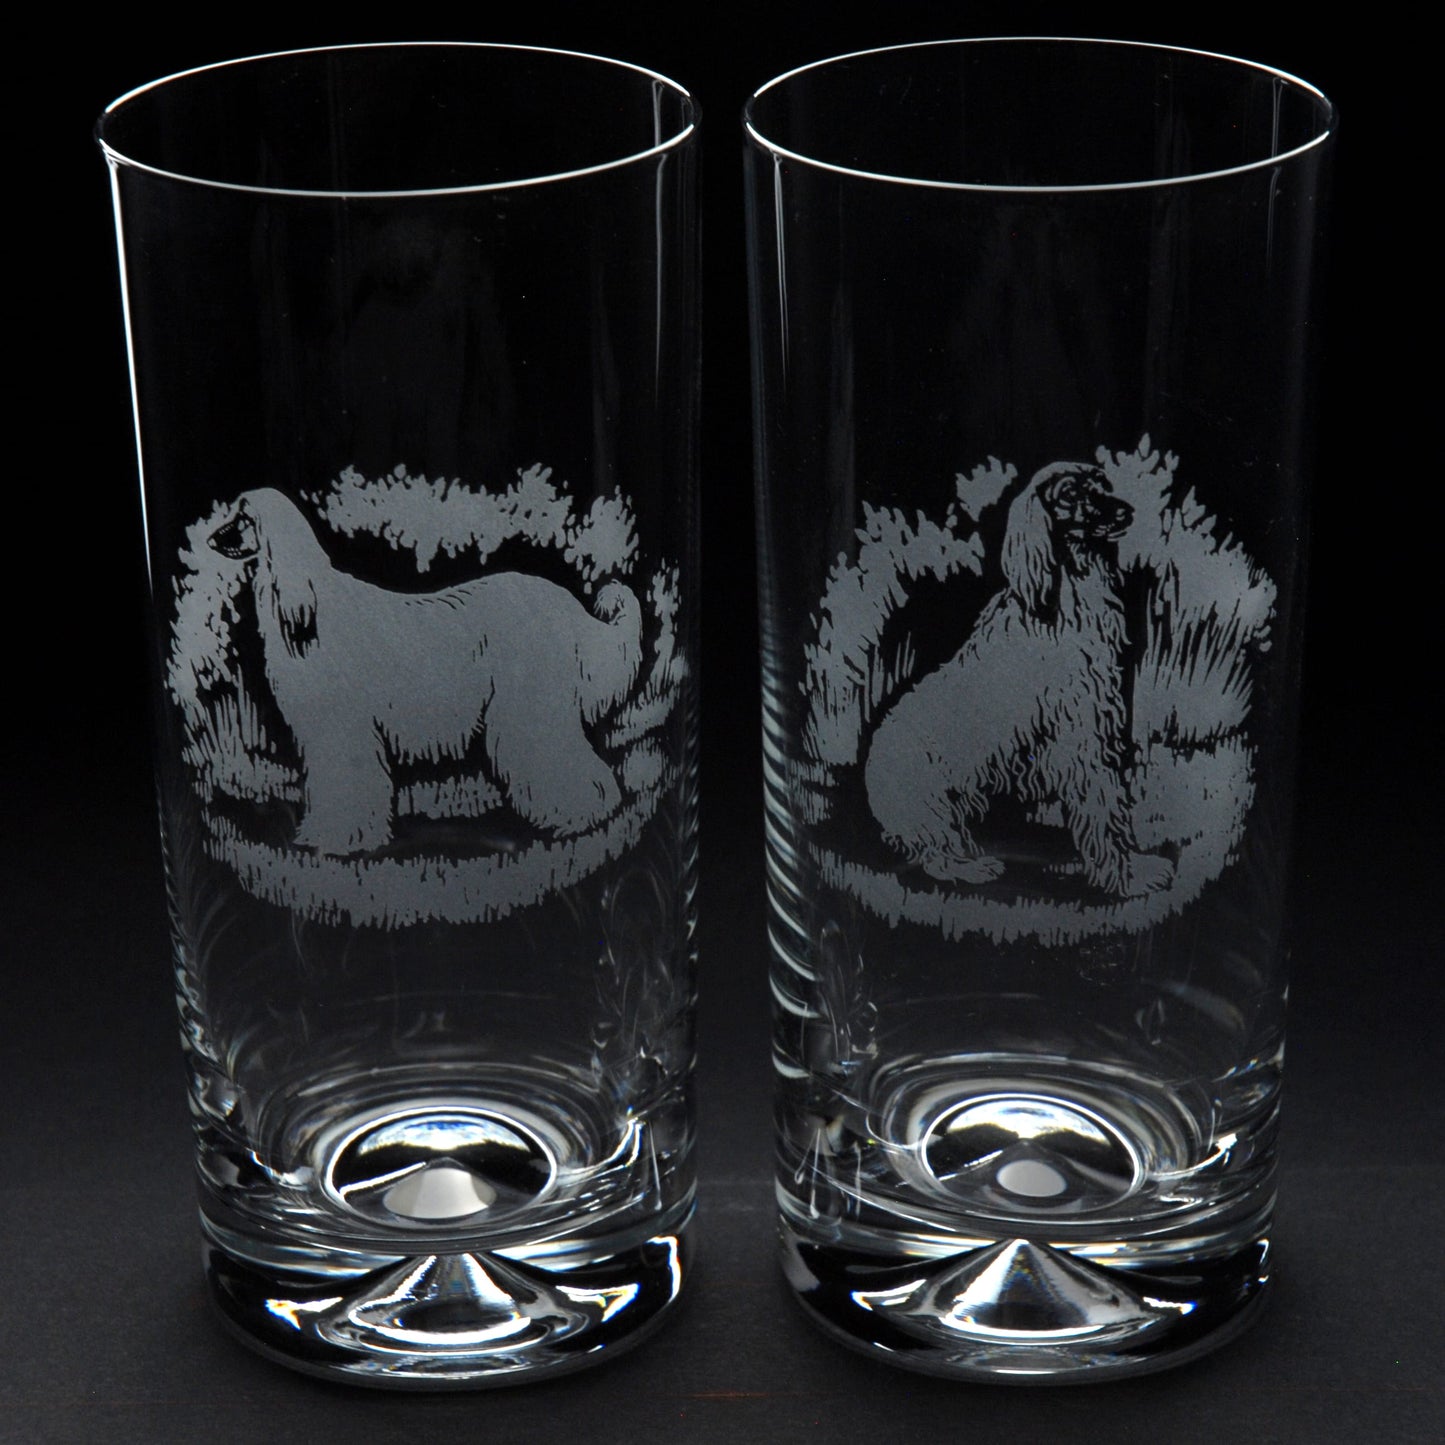 Afghan Hound Dog Highball Glass - Hand Etched/Engraved Gift